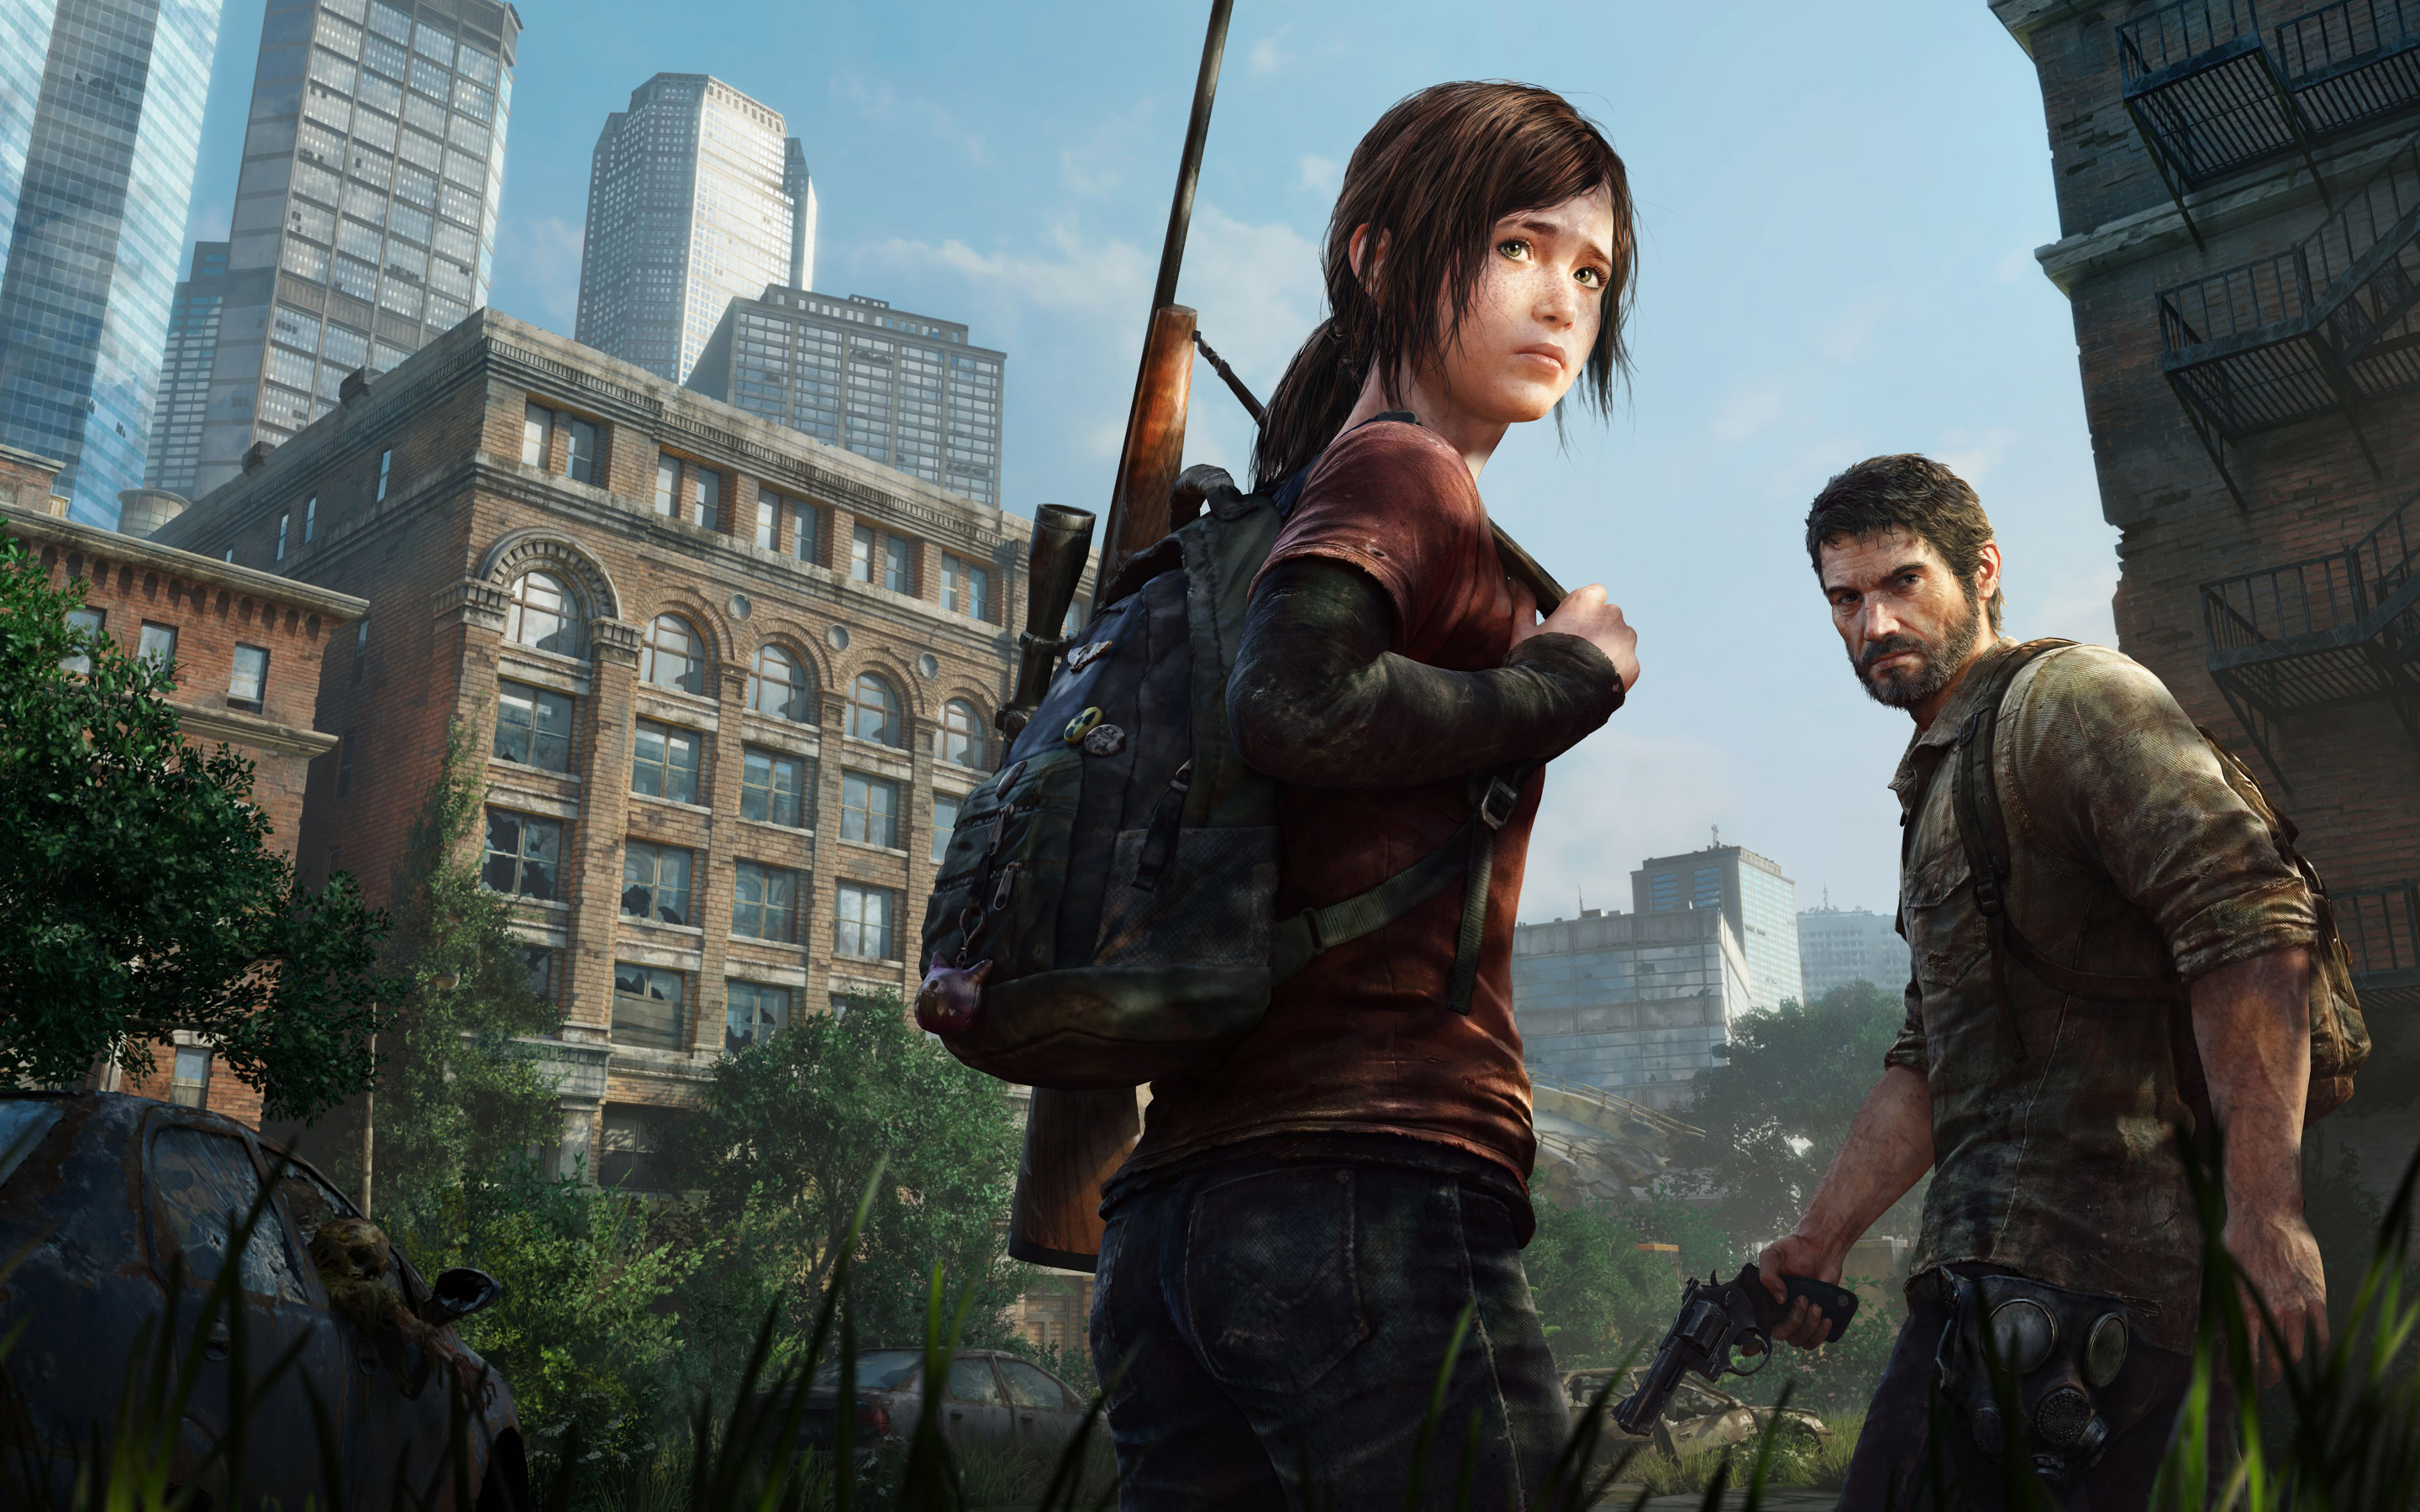 Thoughts on The Last of Us